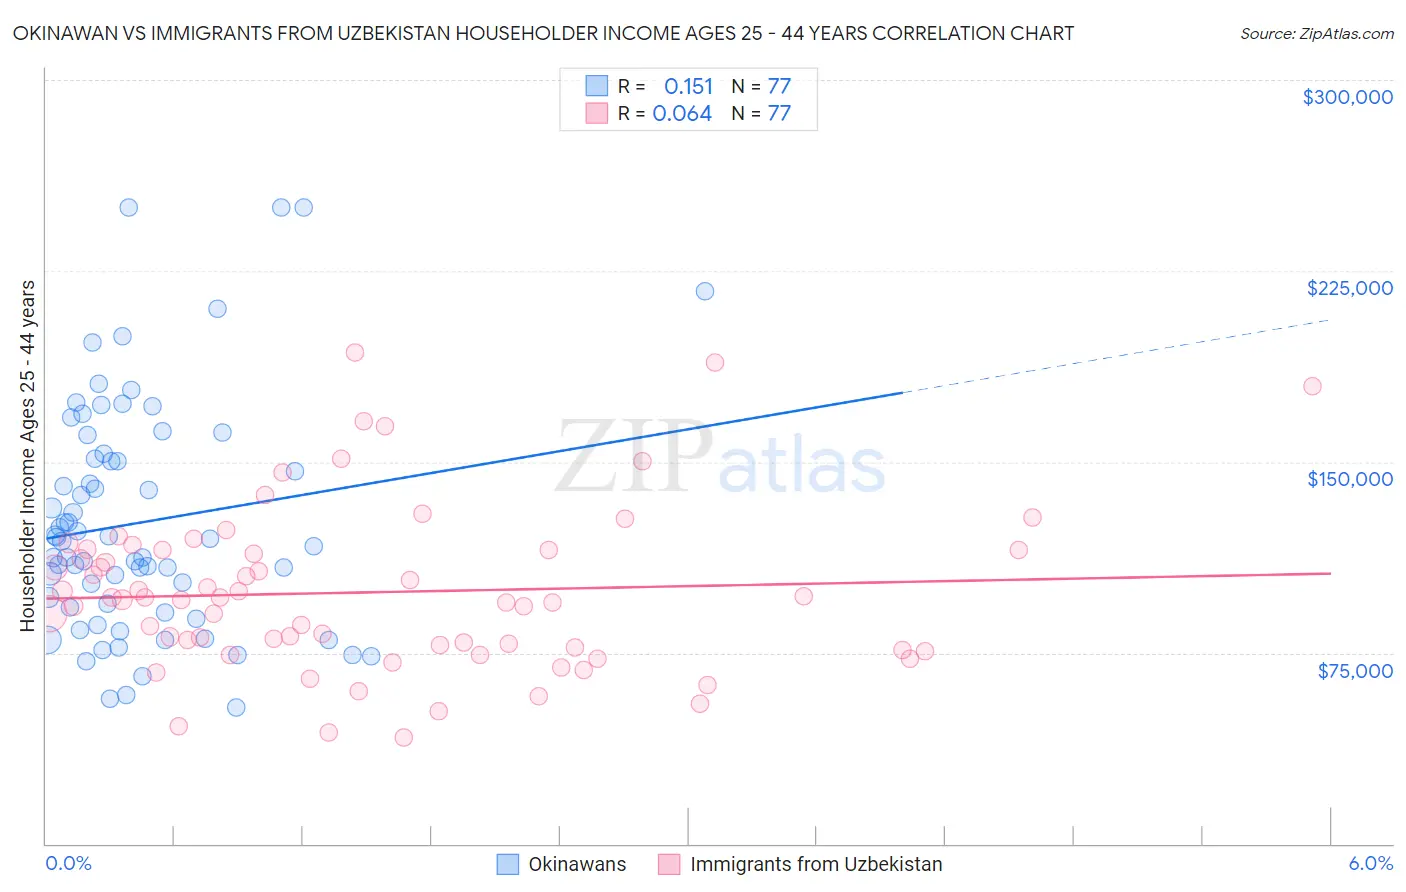 Okinawan vs Immigrants from Uzbekistan Householder Income Ages 25 - 44 years